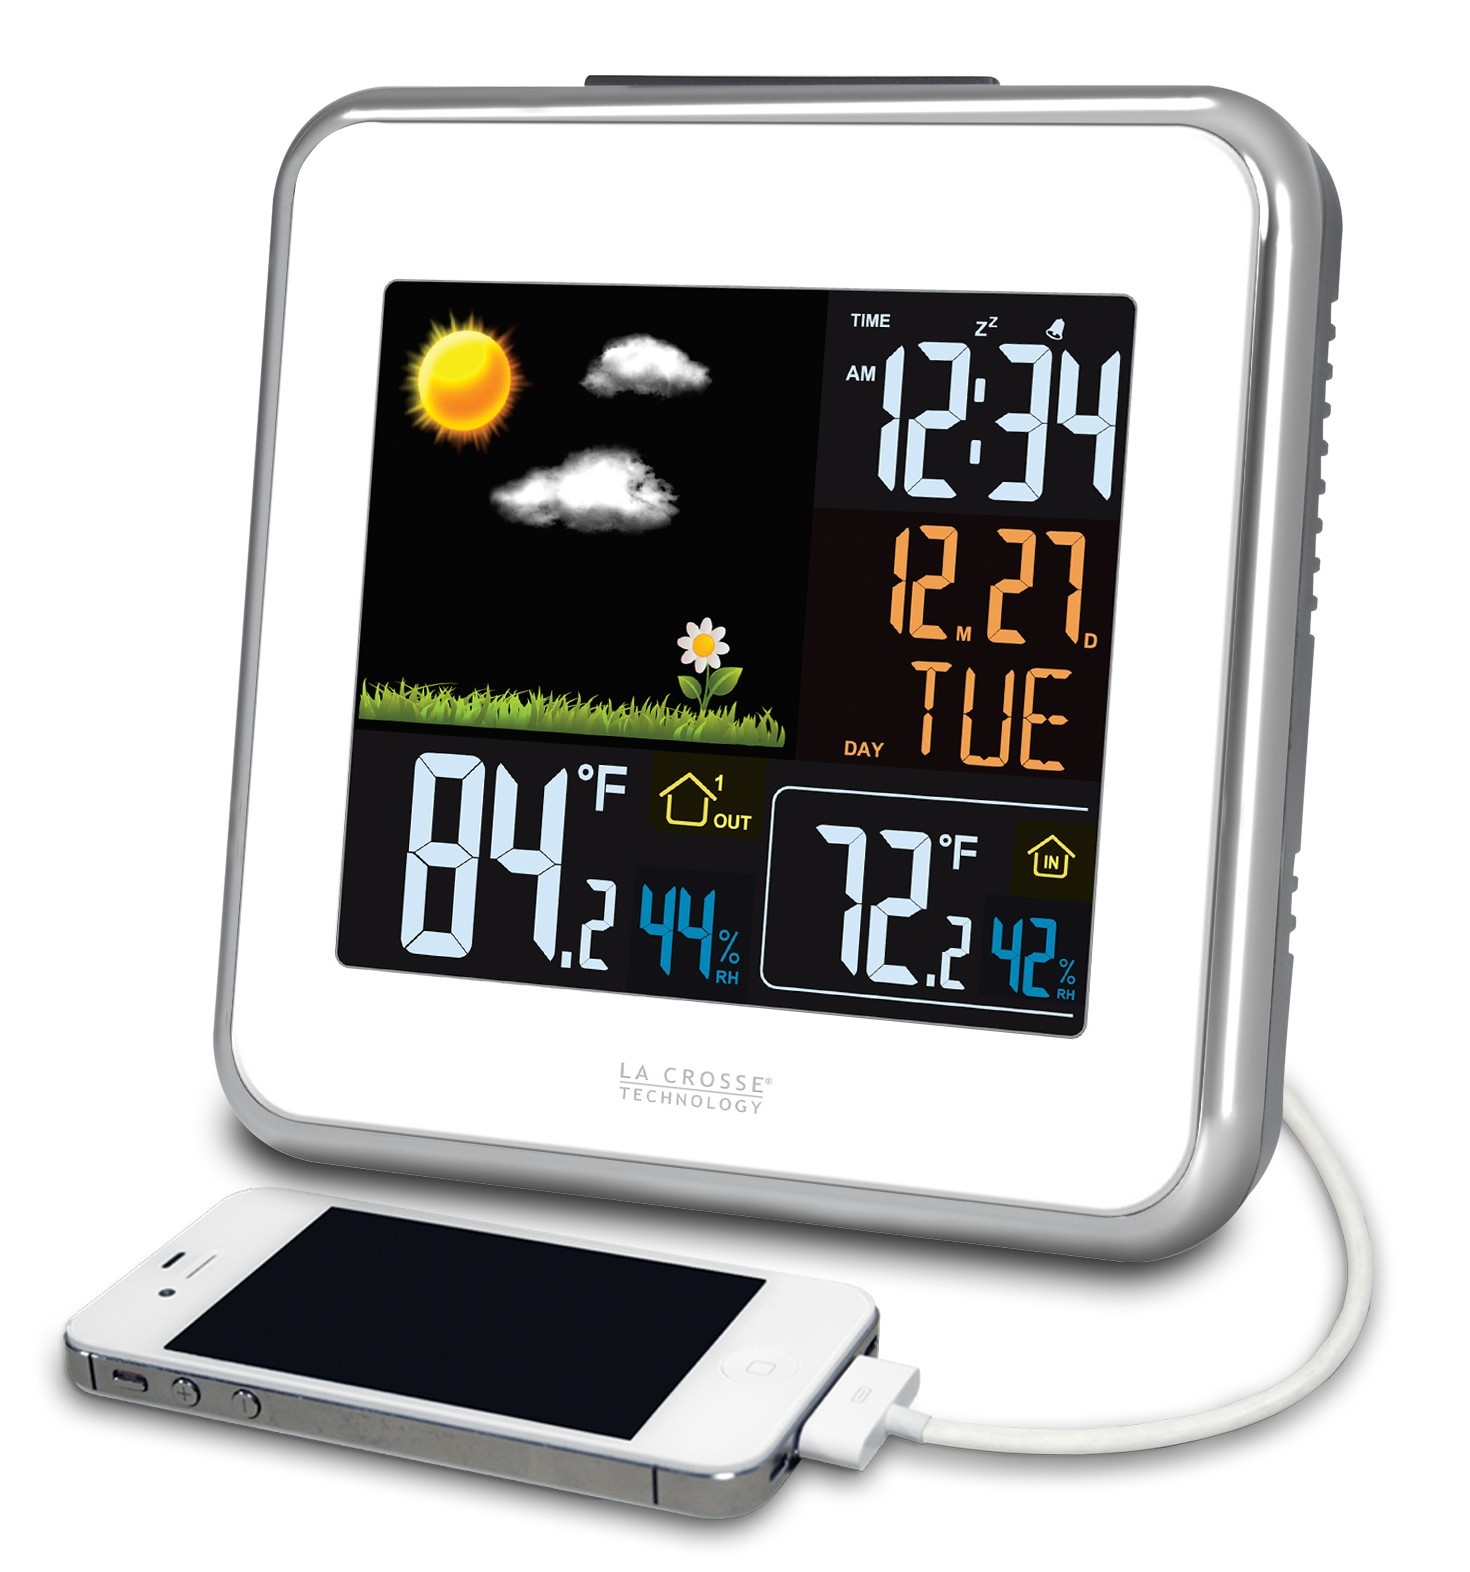 La Crosse Technology 308-146W Atomic Wireless Color Forecast Station with Dew Point, Heat Index, USB charging port